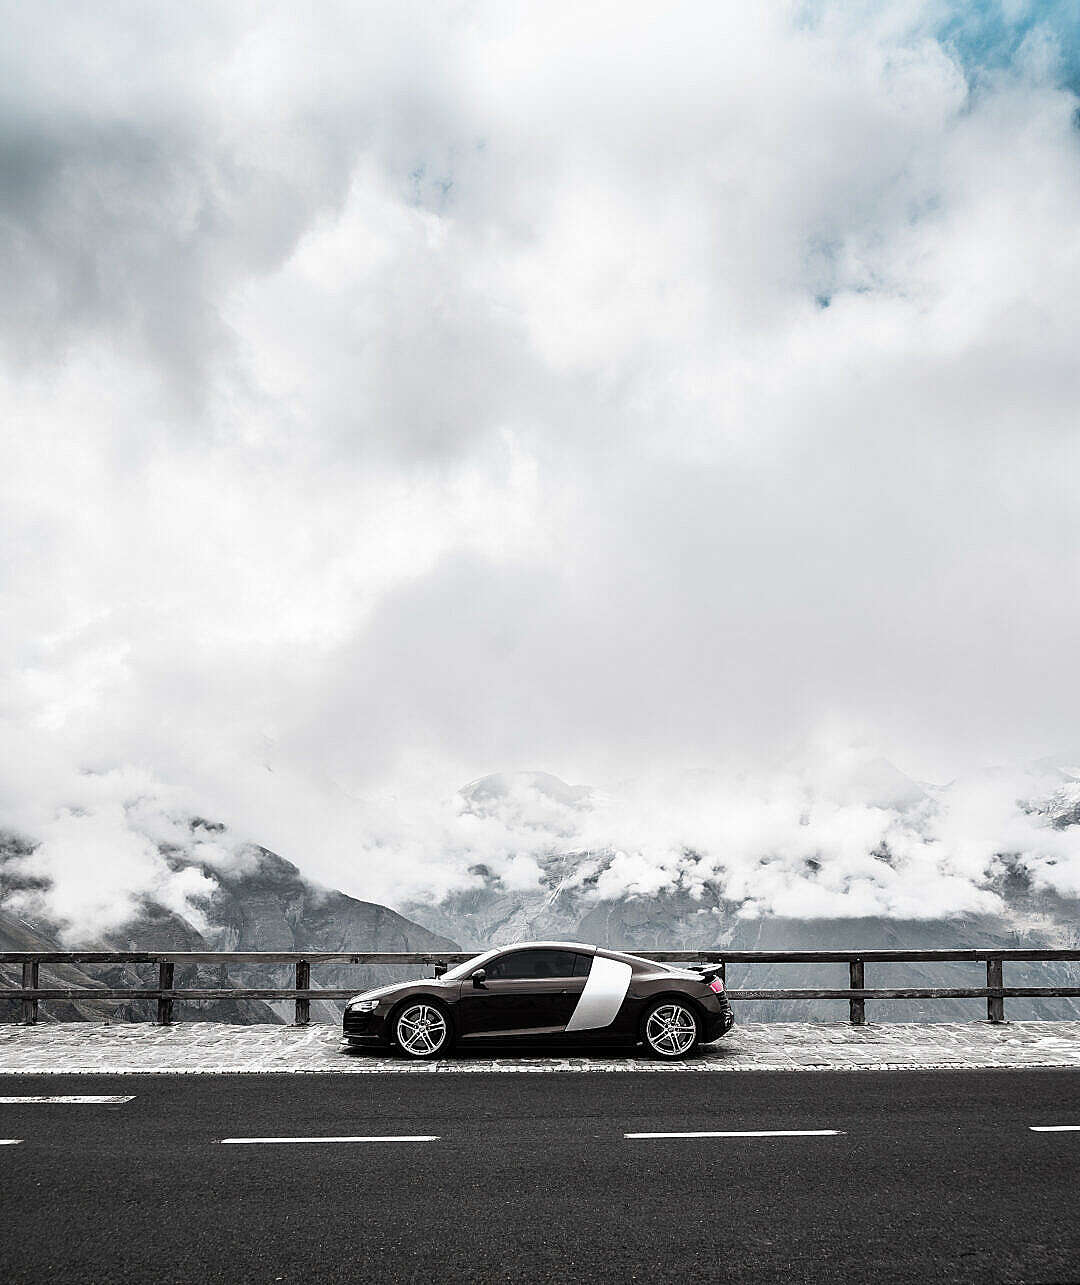 Download Audi R8 on Grossglockner Quote FREE Stock Photo